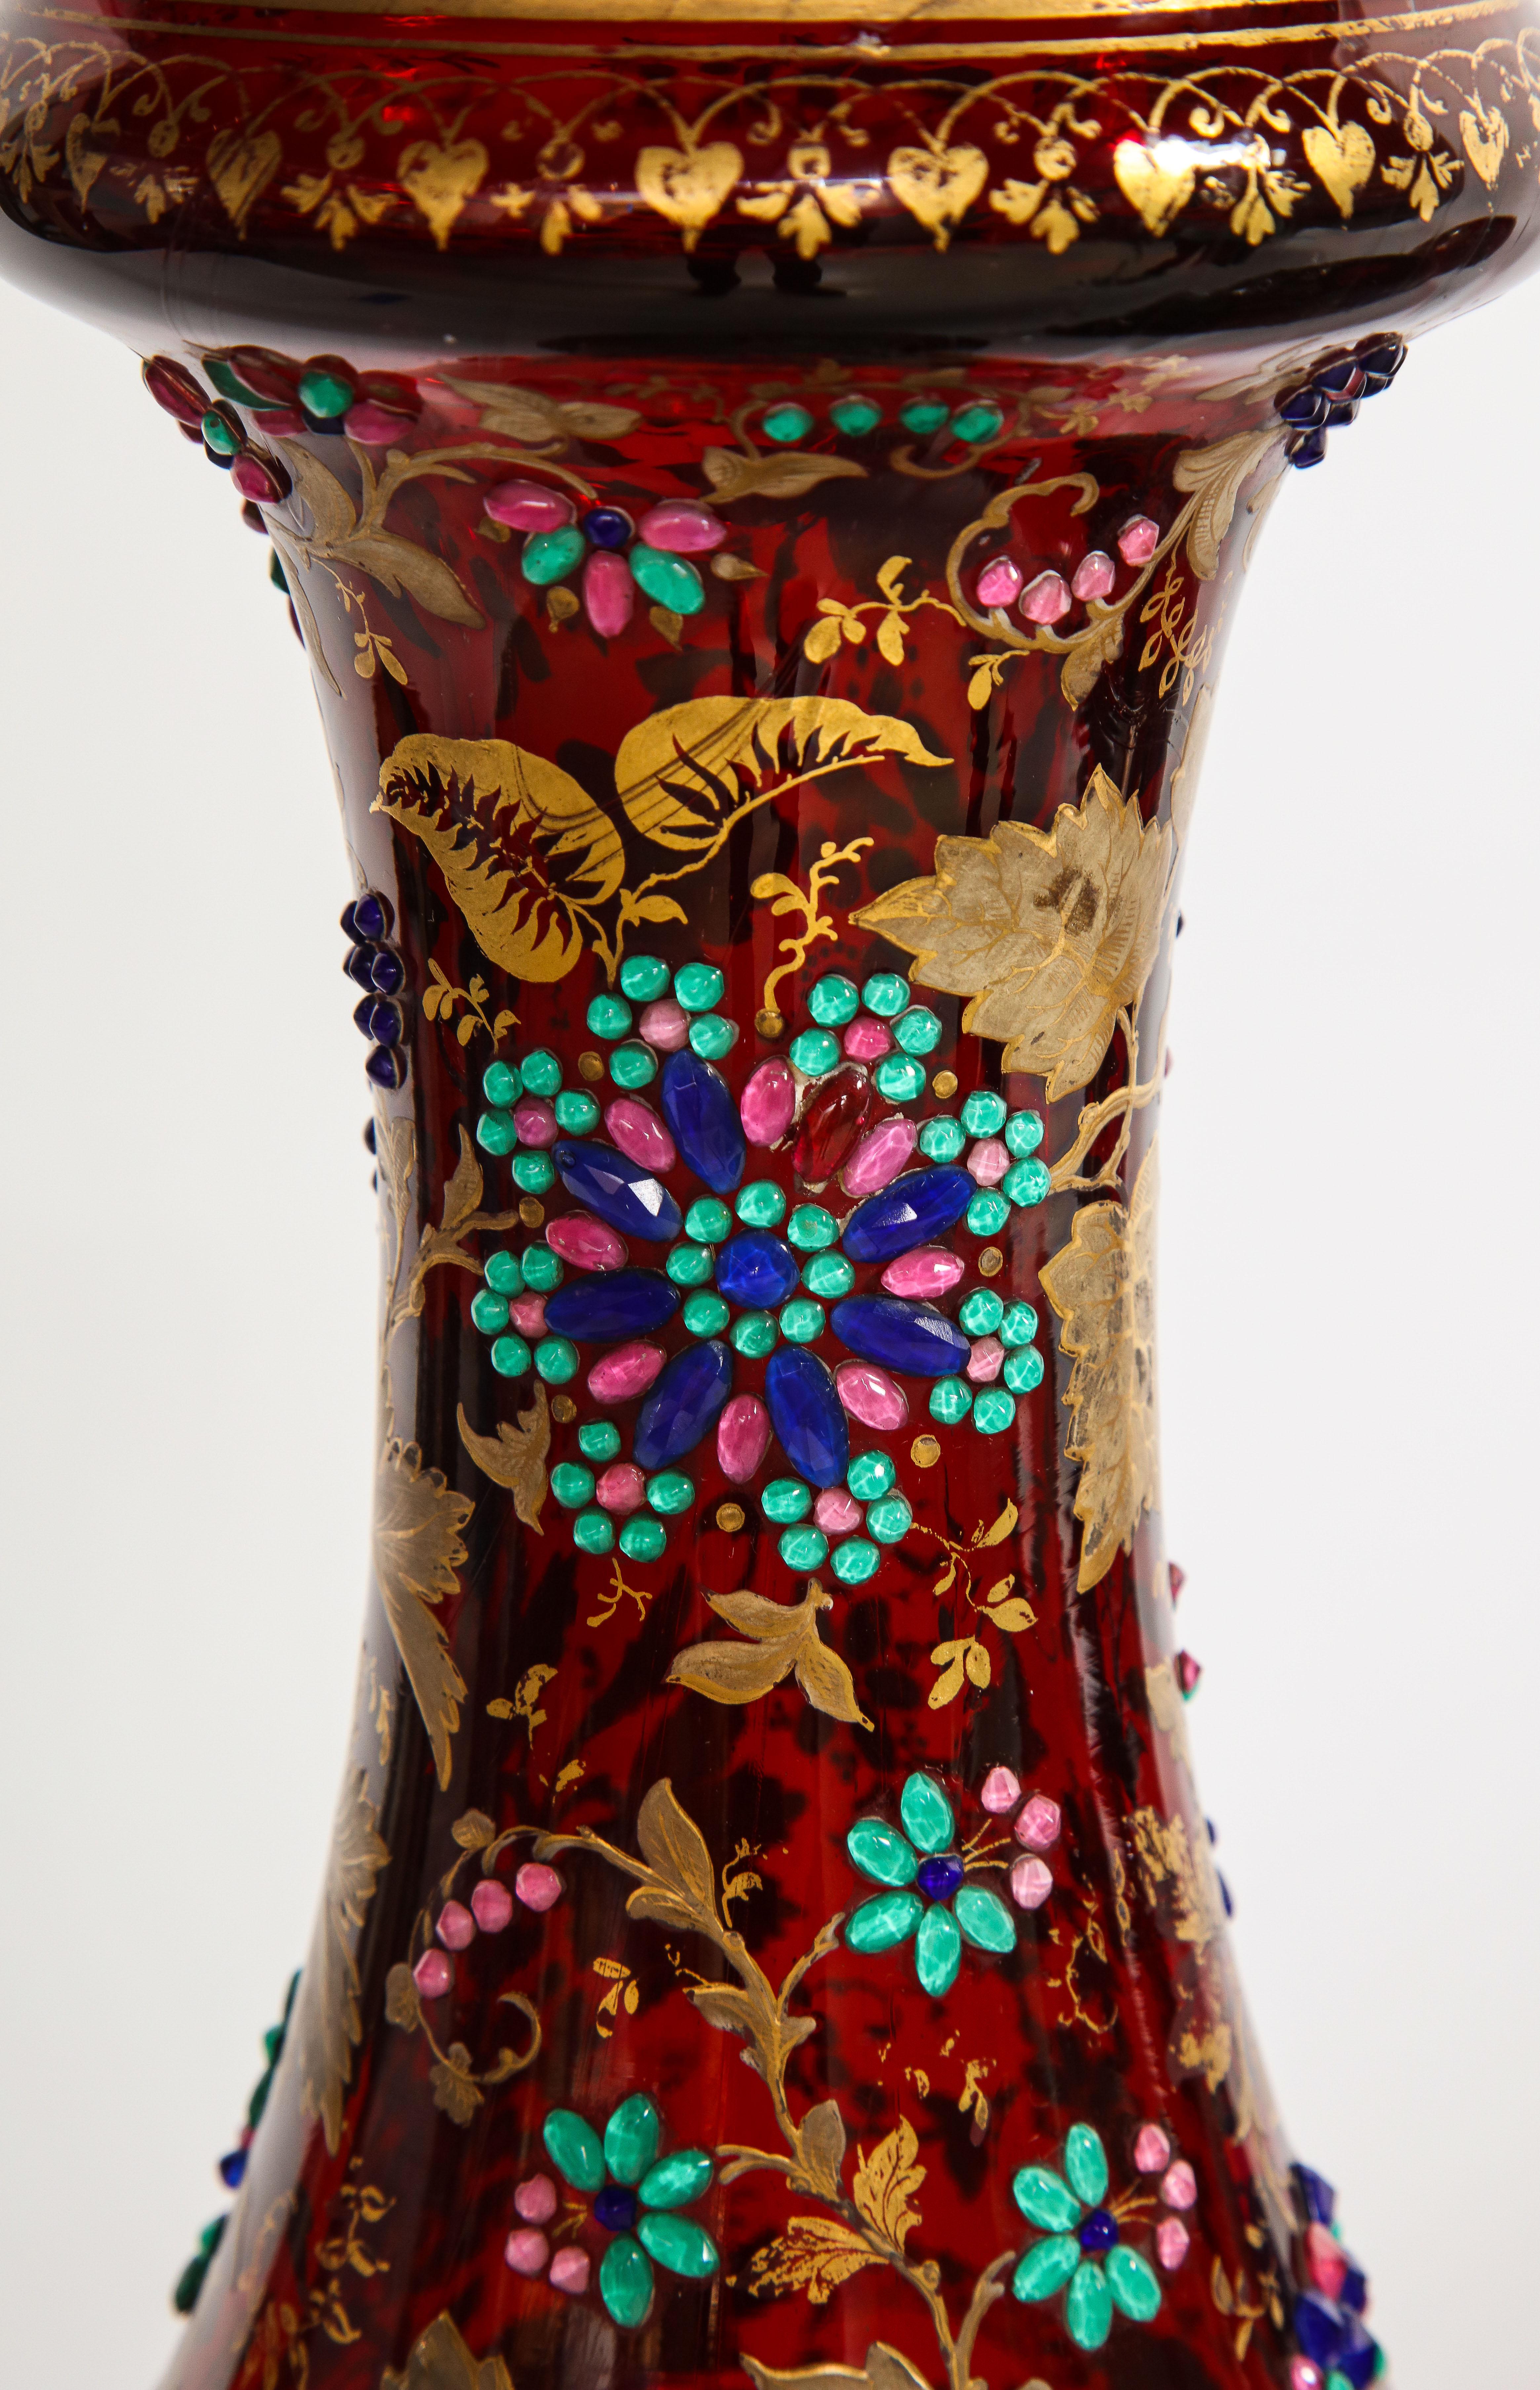 Hand-Crafted Monumental Pr Moser jeweled Ruby-Red Overlay Two-Piece 24k Gold, Enameled Vases For Sale